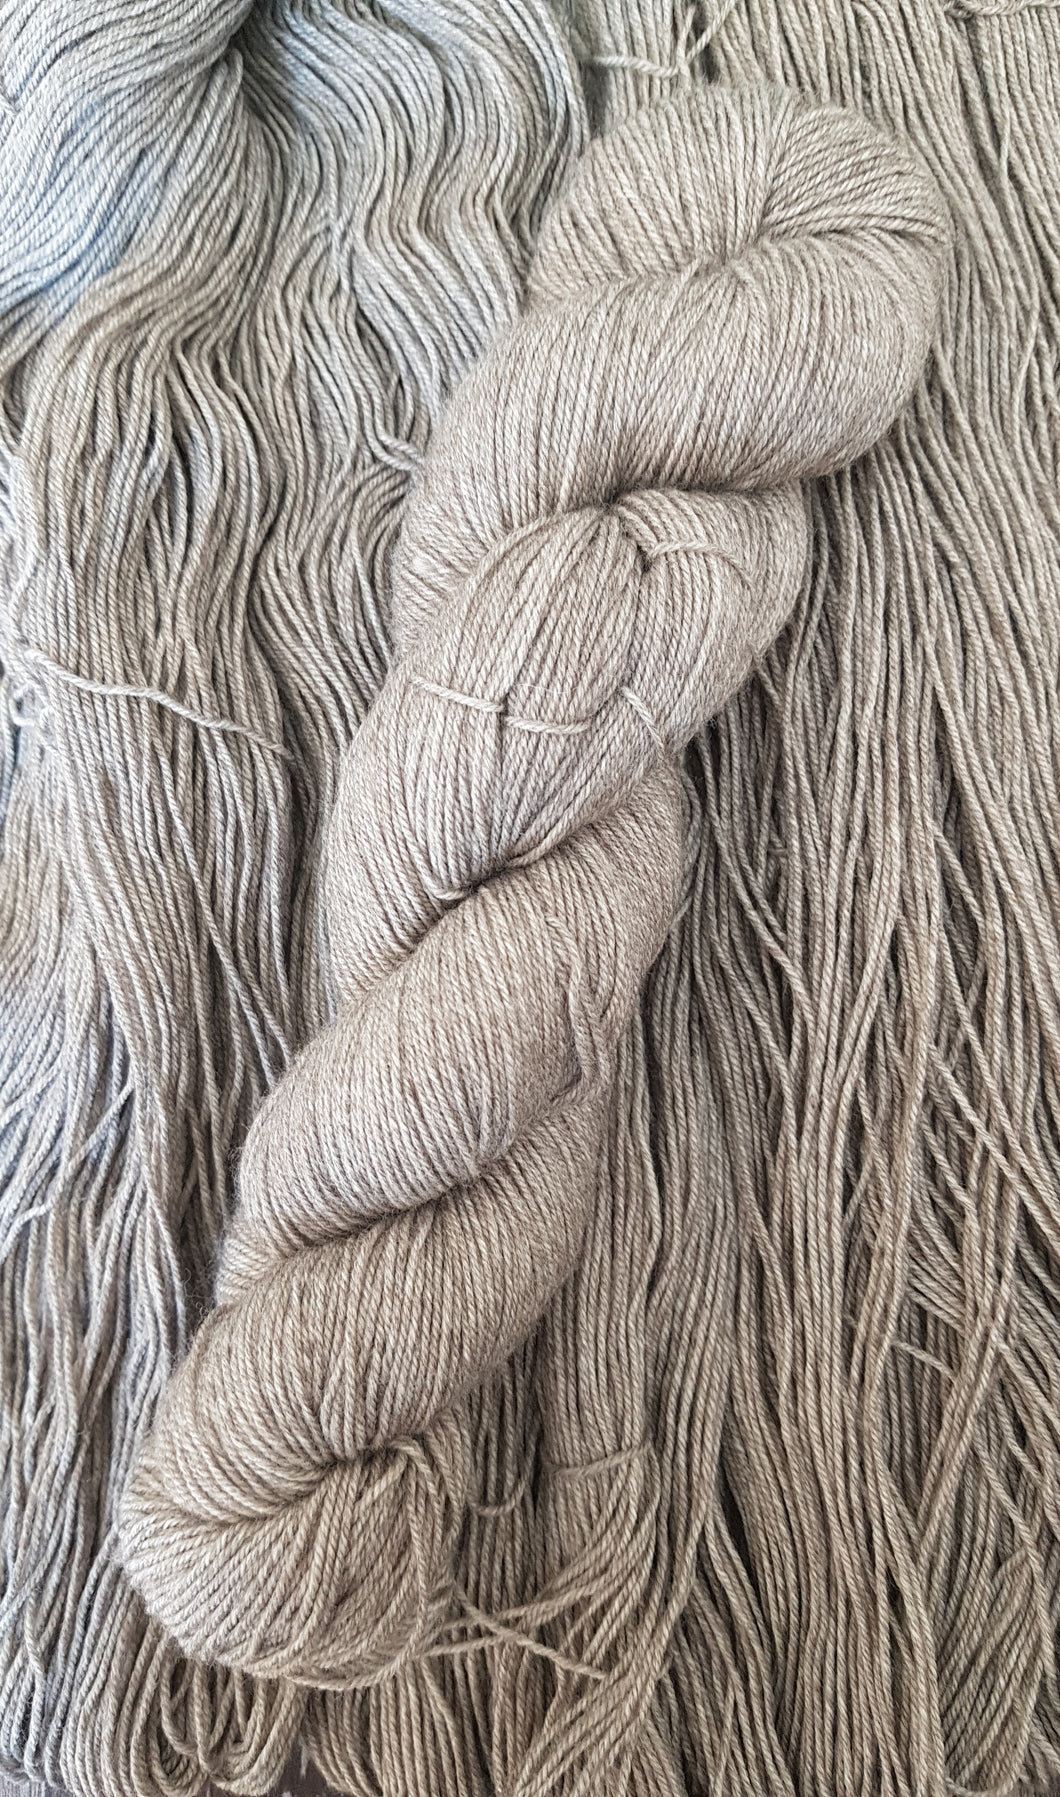 Natural(undyed) 100g 4ply.